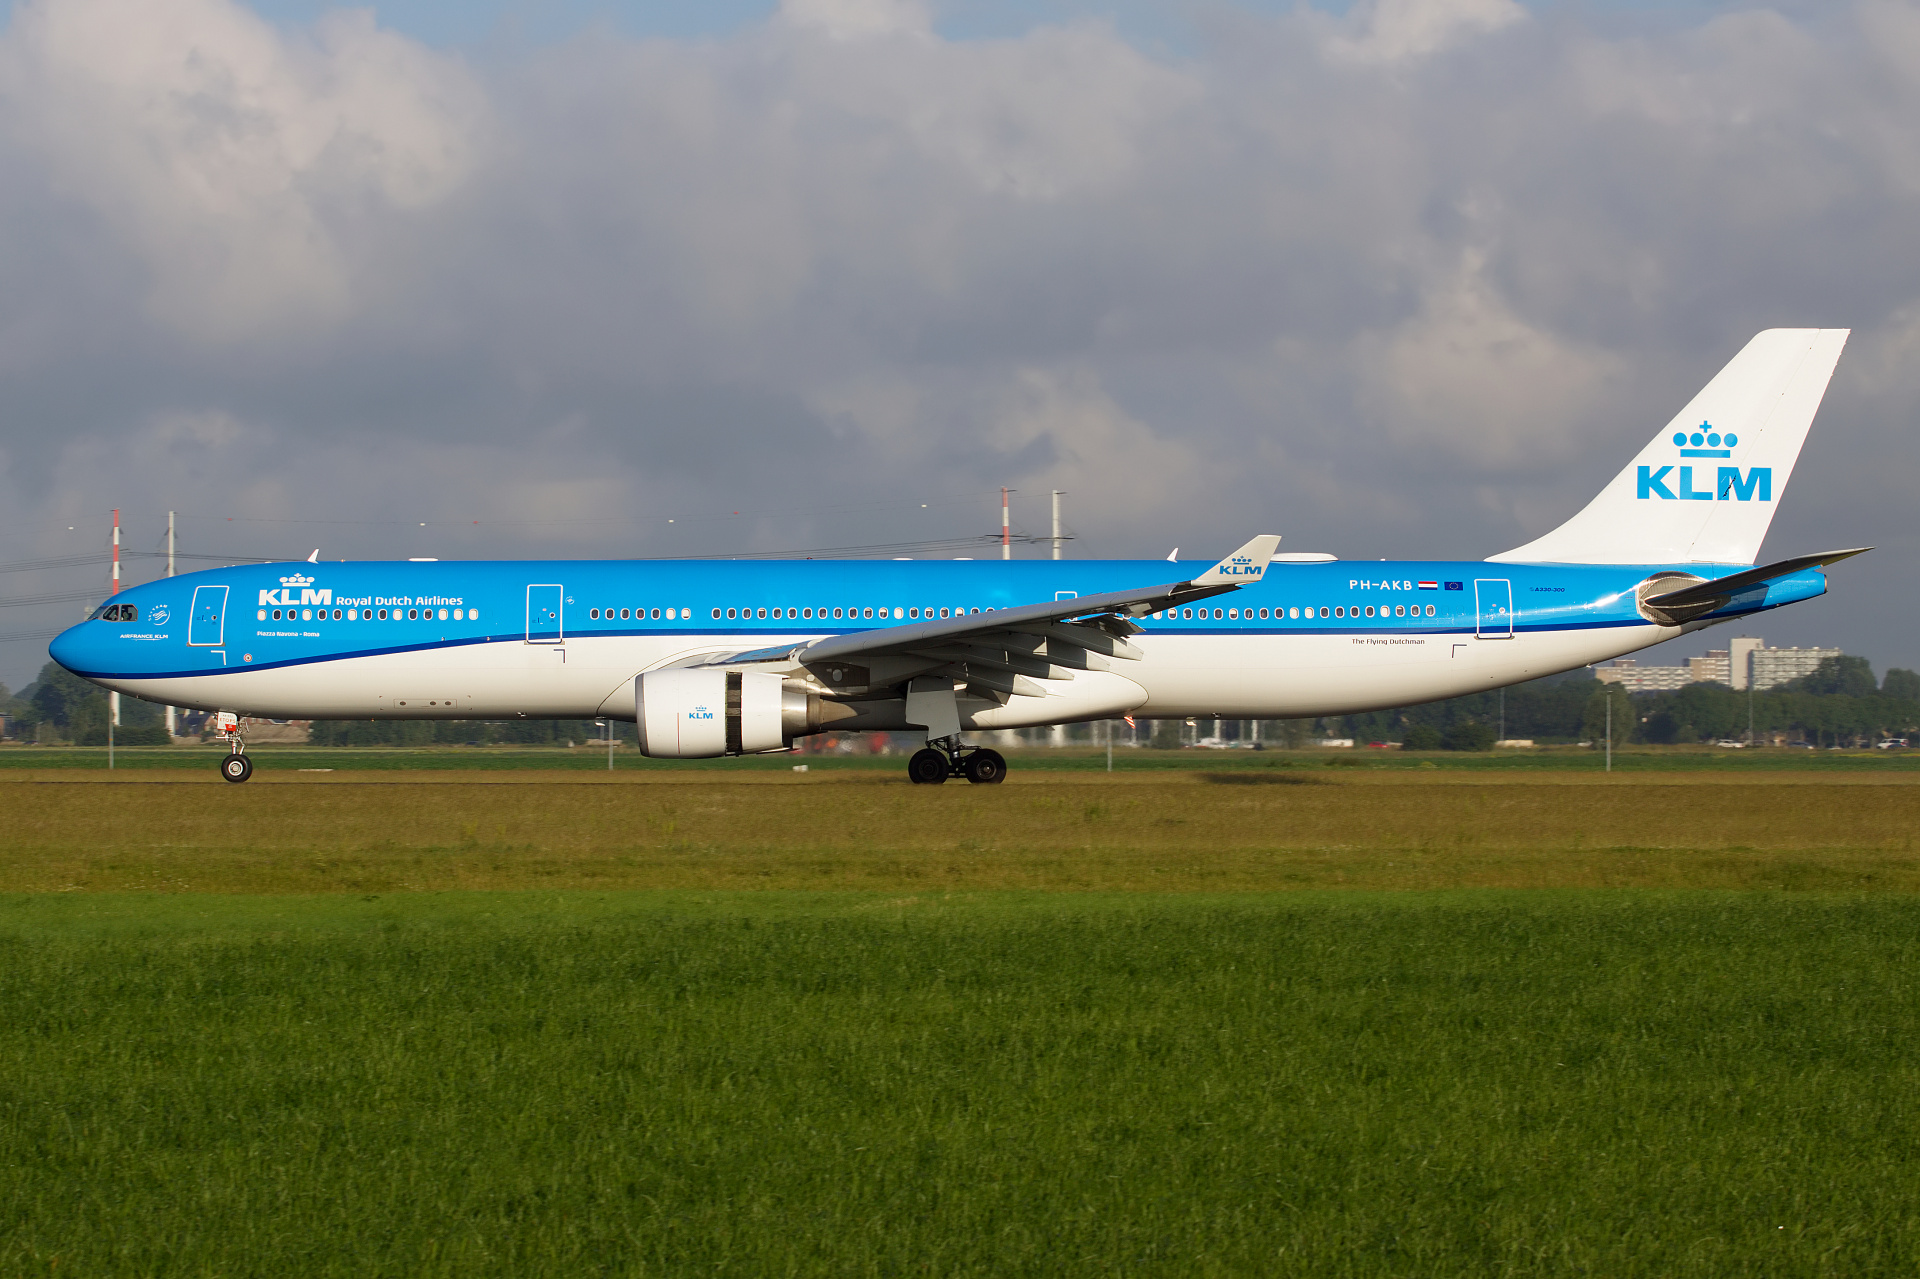 PH-AKB (new livery) (Aircraft » Schiphol Spotting » Airbus A330-300 » KLM Royal Dutch Airlines)